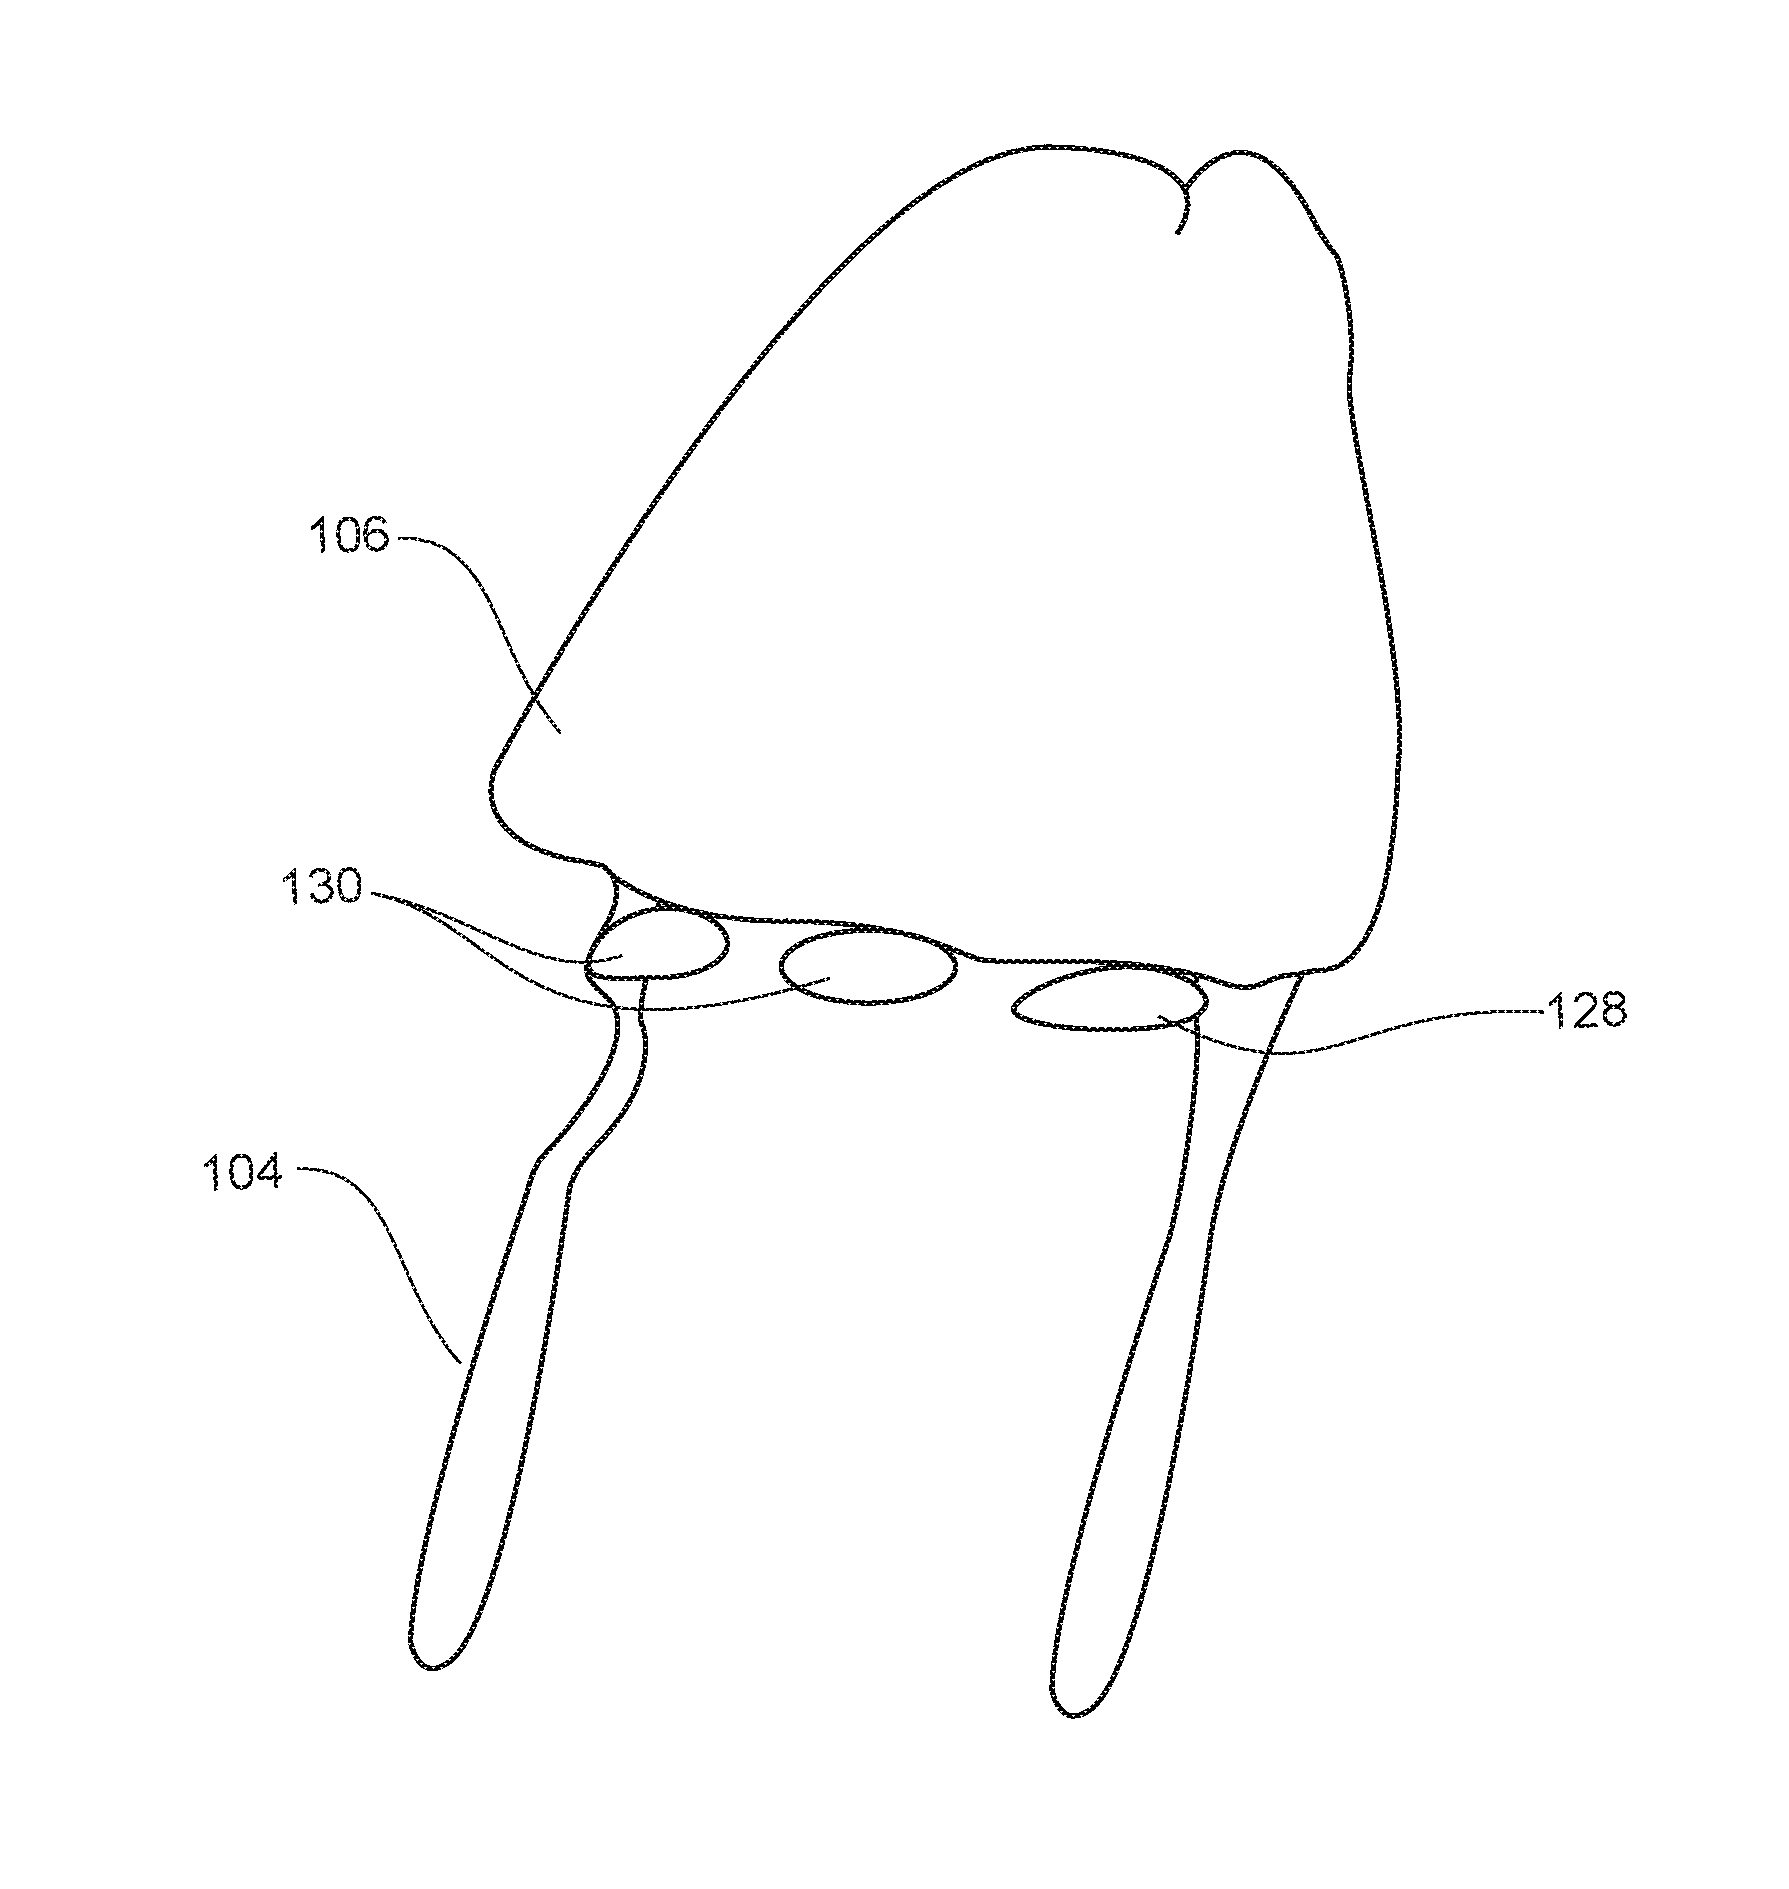 Minimally Invasive Method of Augmenting a Glans Penis with Intradermal Filler Material